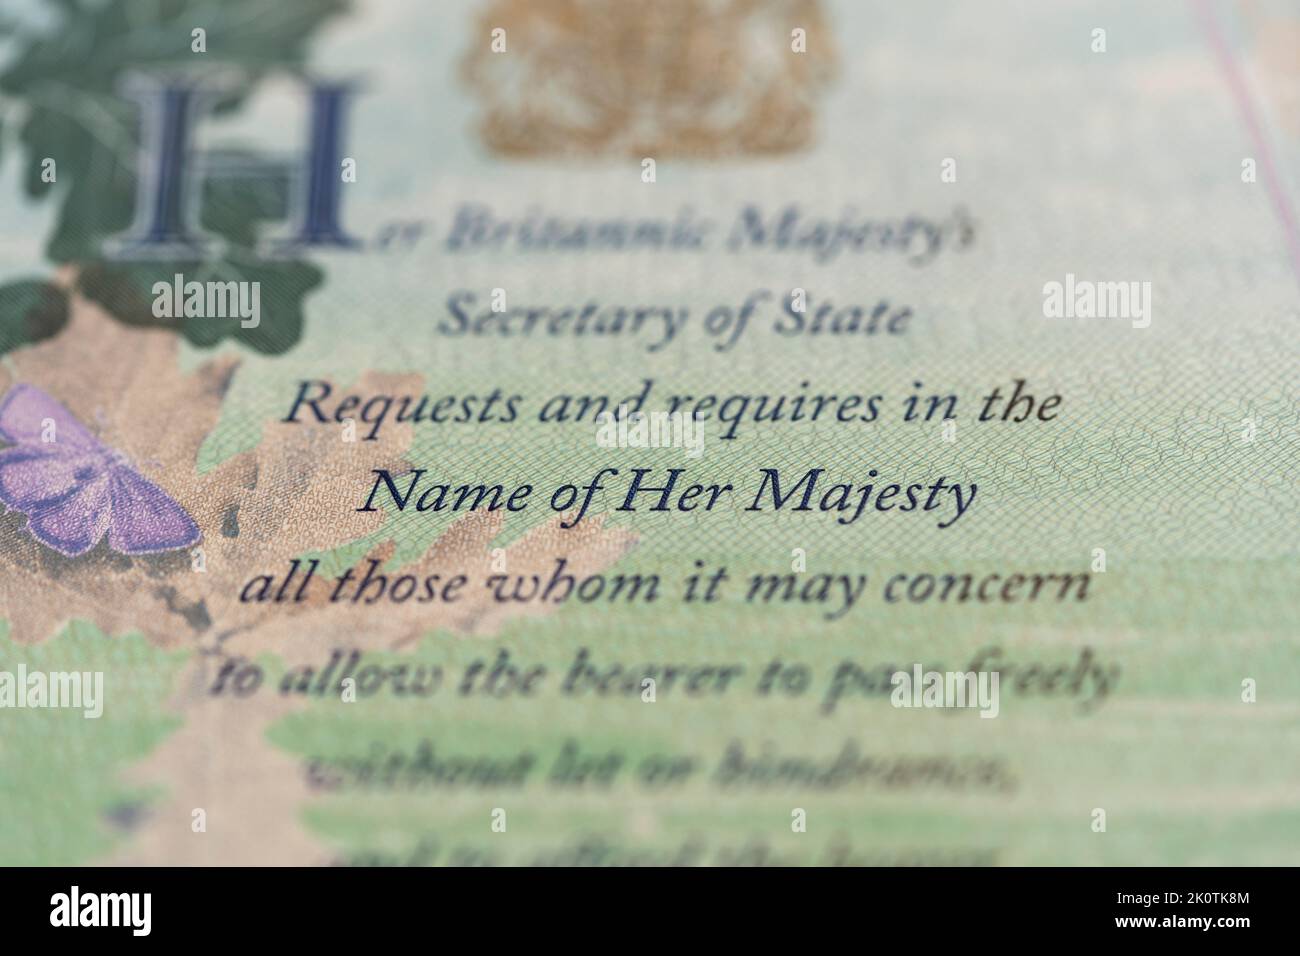 On 8 September 2022, Elizabeth II, Queen of the United Kingdom died. A message from the queen on the inside page of a British passport 'Her Majesty' Stock Photo